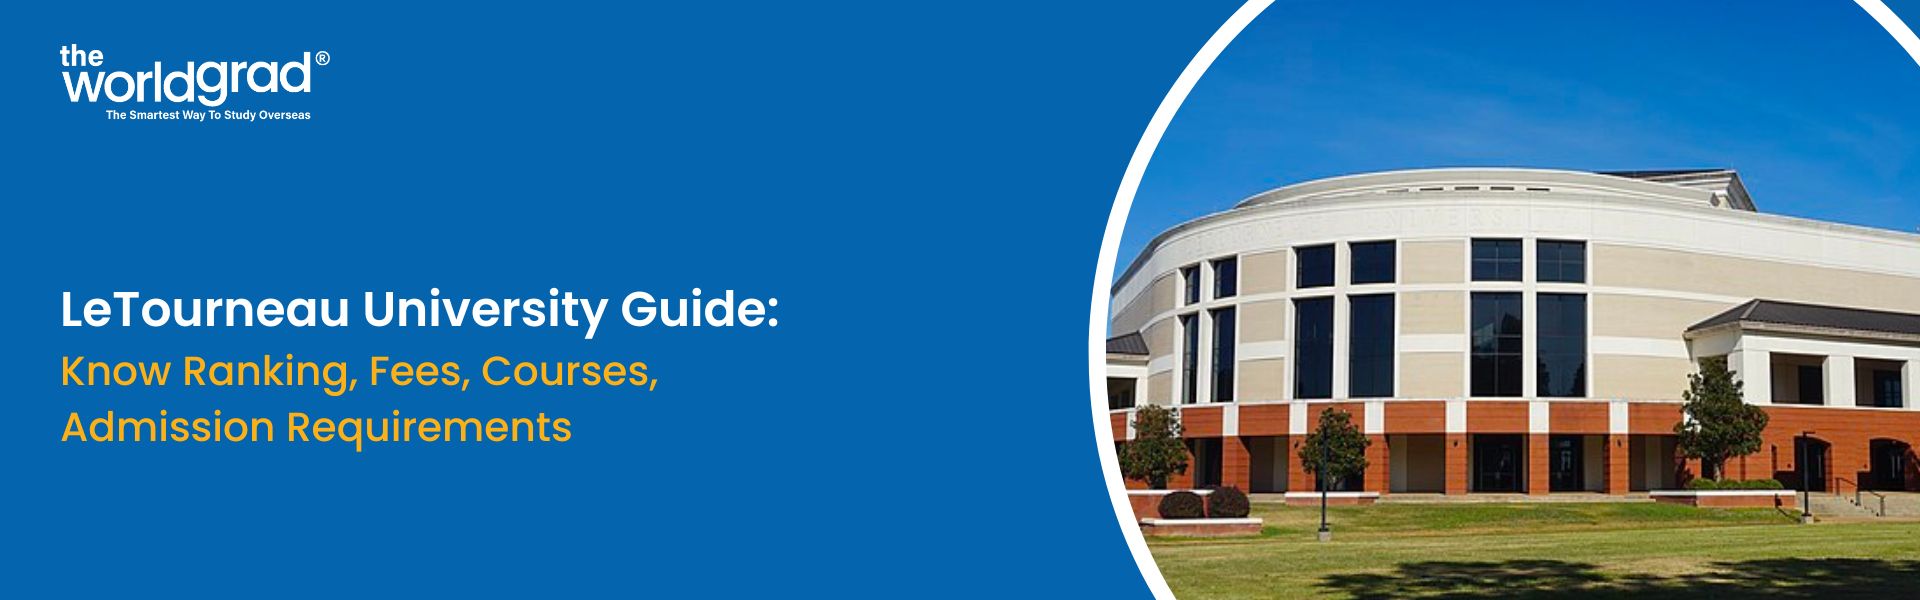 LeTourneau University Guide: Know Ranking, Fees, Courses, Admission Requirements